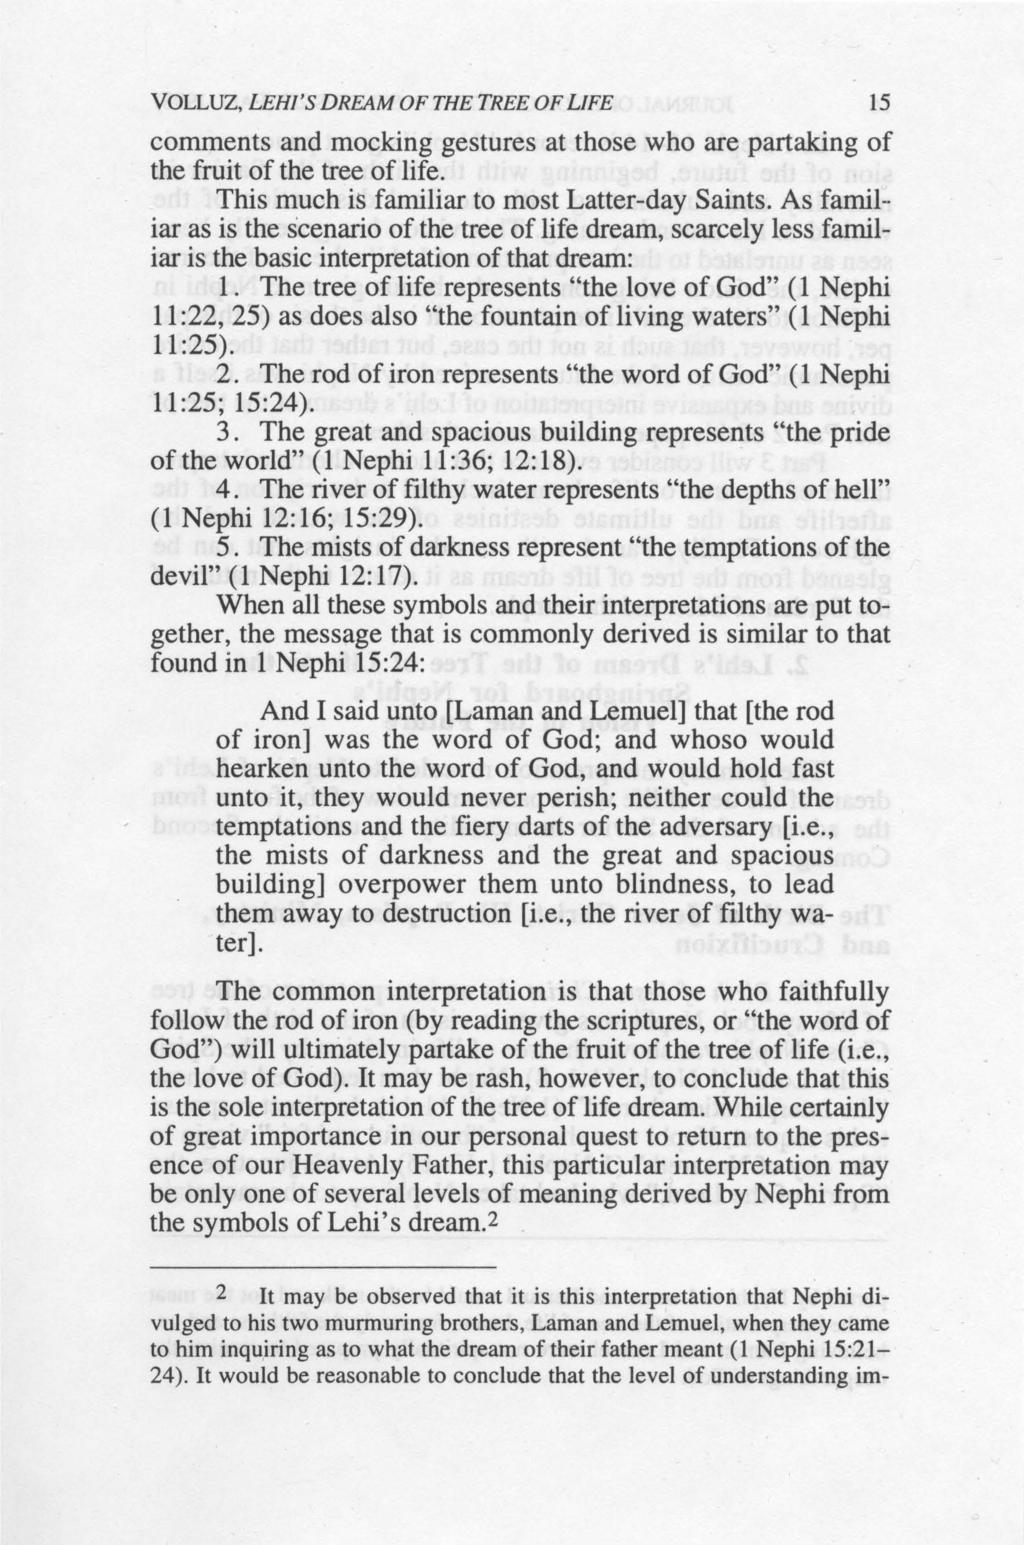 VOLLUZ, LEHI'S DREAM OF THE TREE OF LIFE 15 comments and mocking gestures at those who are partaking of the fruit of the tree of life. This much is familiar to most Latter-day Saints.